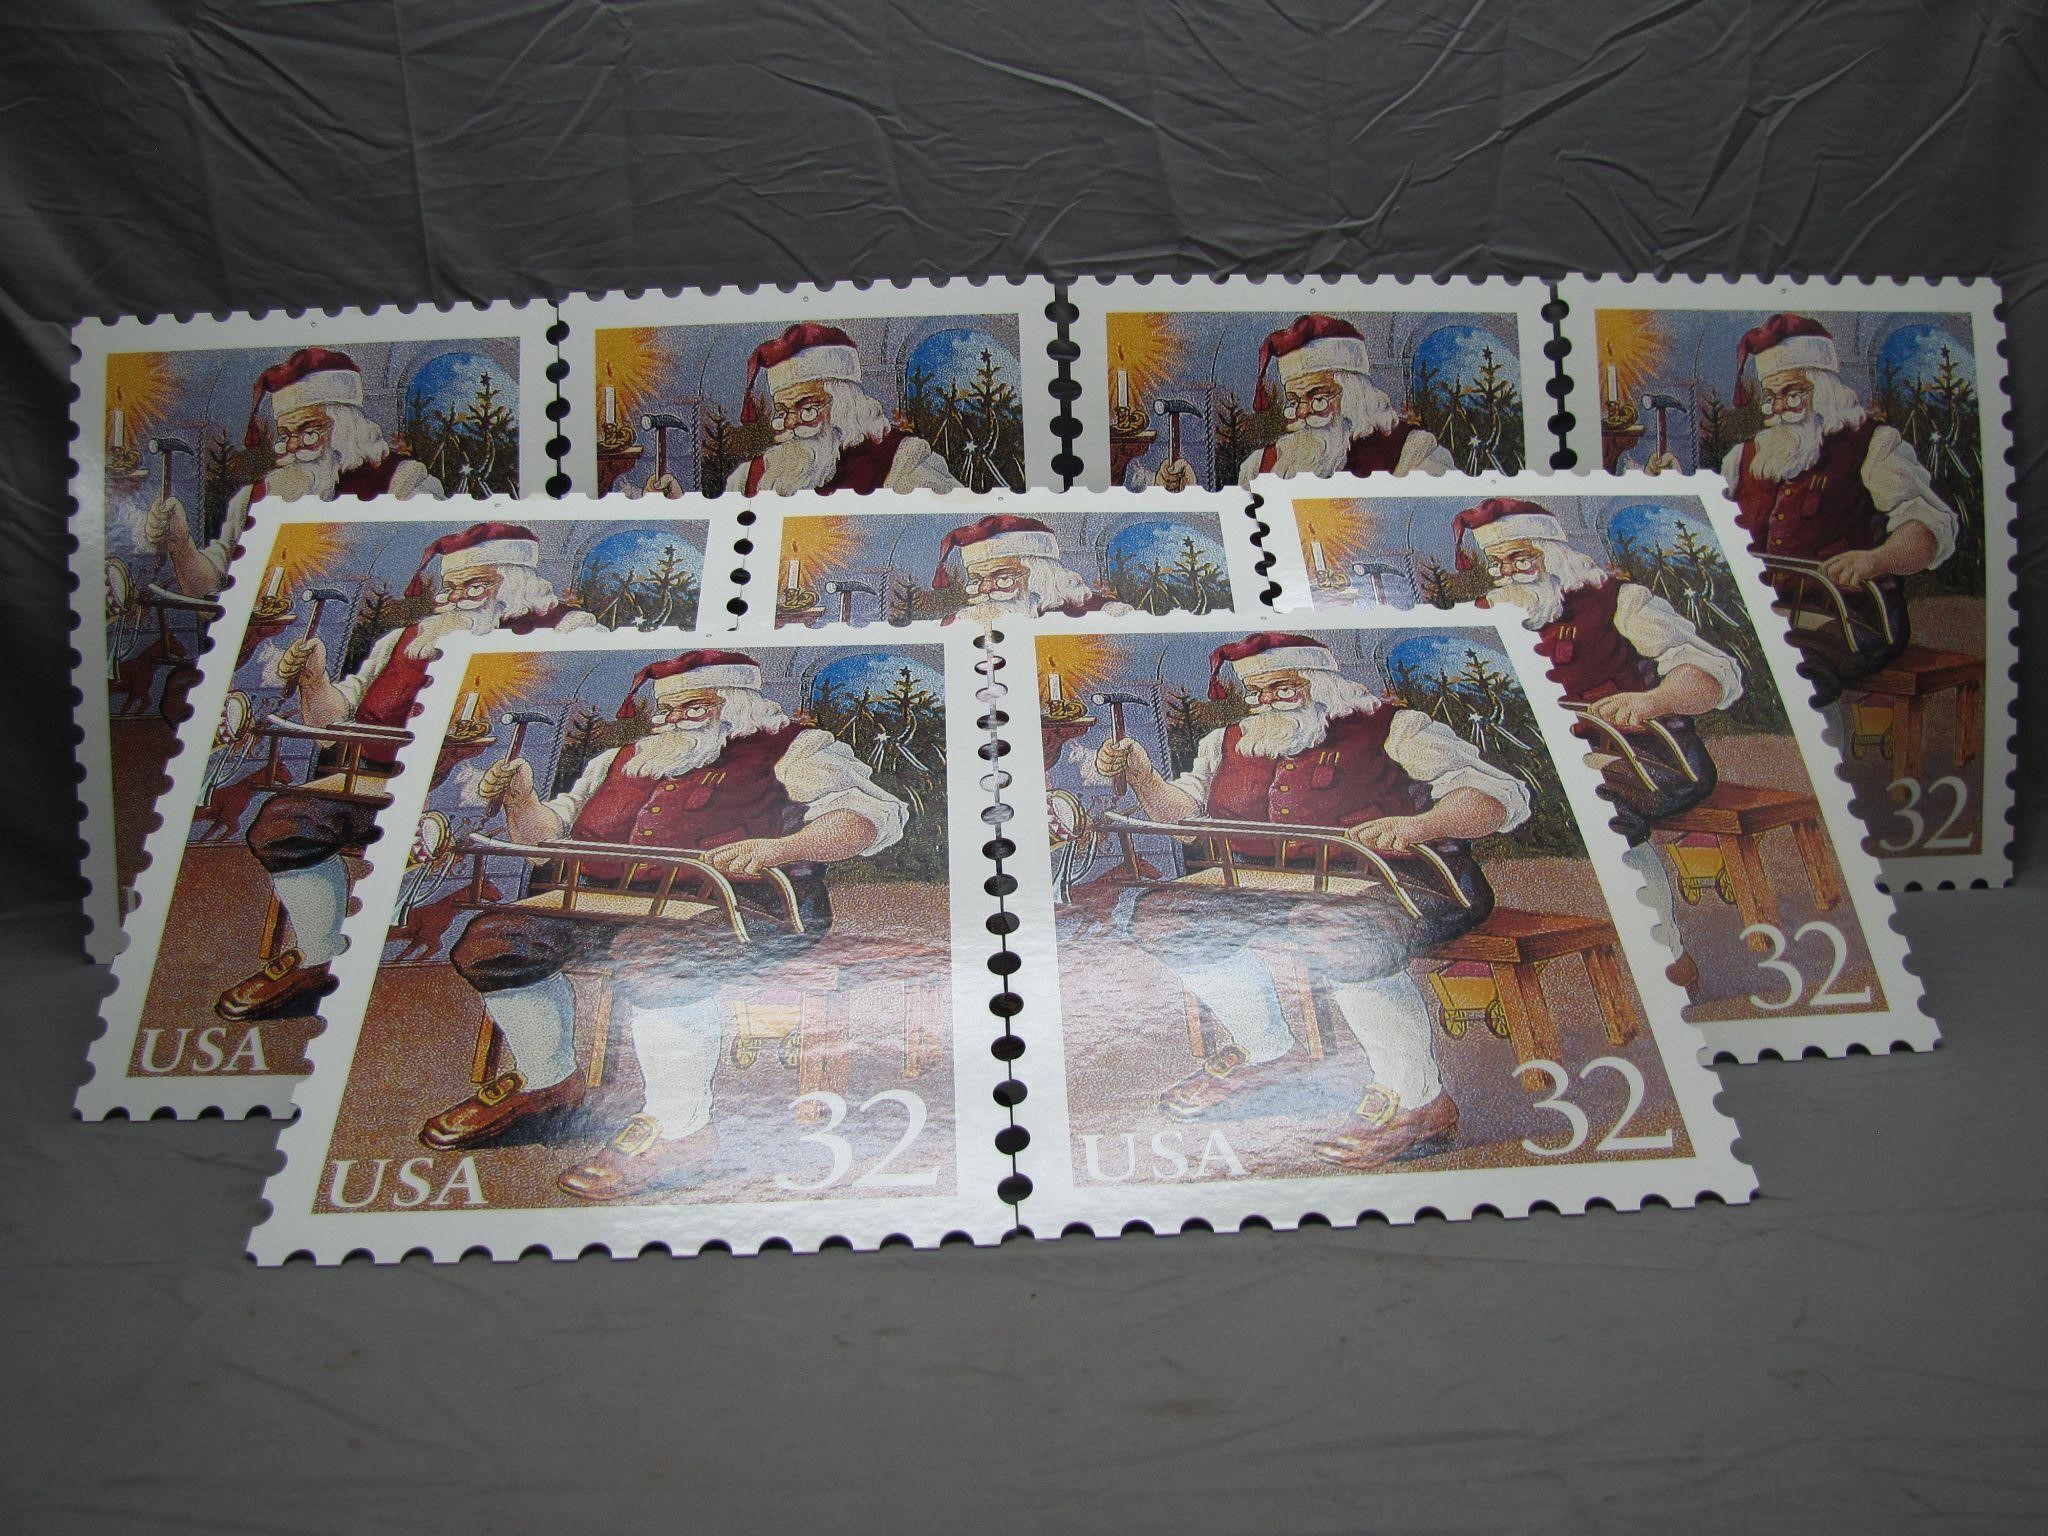 9 USPS Santa Clause 32 Cent Stamps